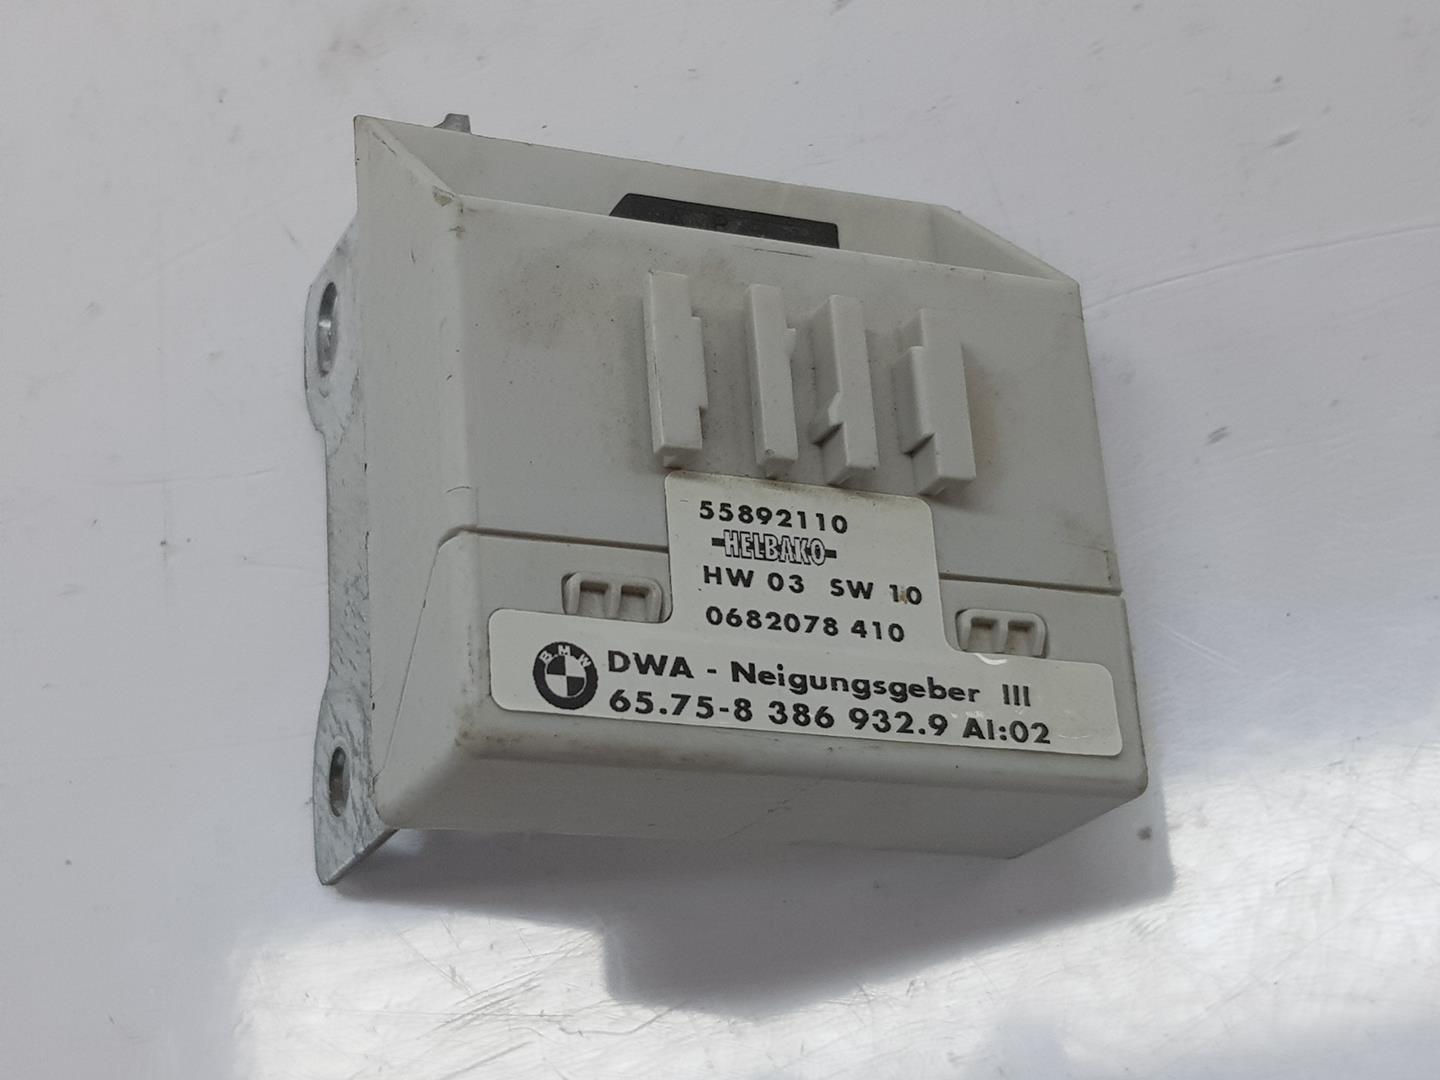 BMW 3 Series E46 (1997-2006) Other Control Units 65758386932, 8386932 21076103